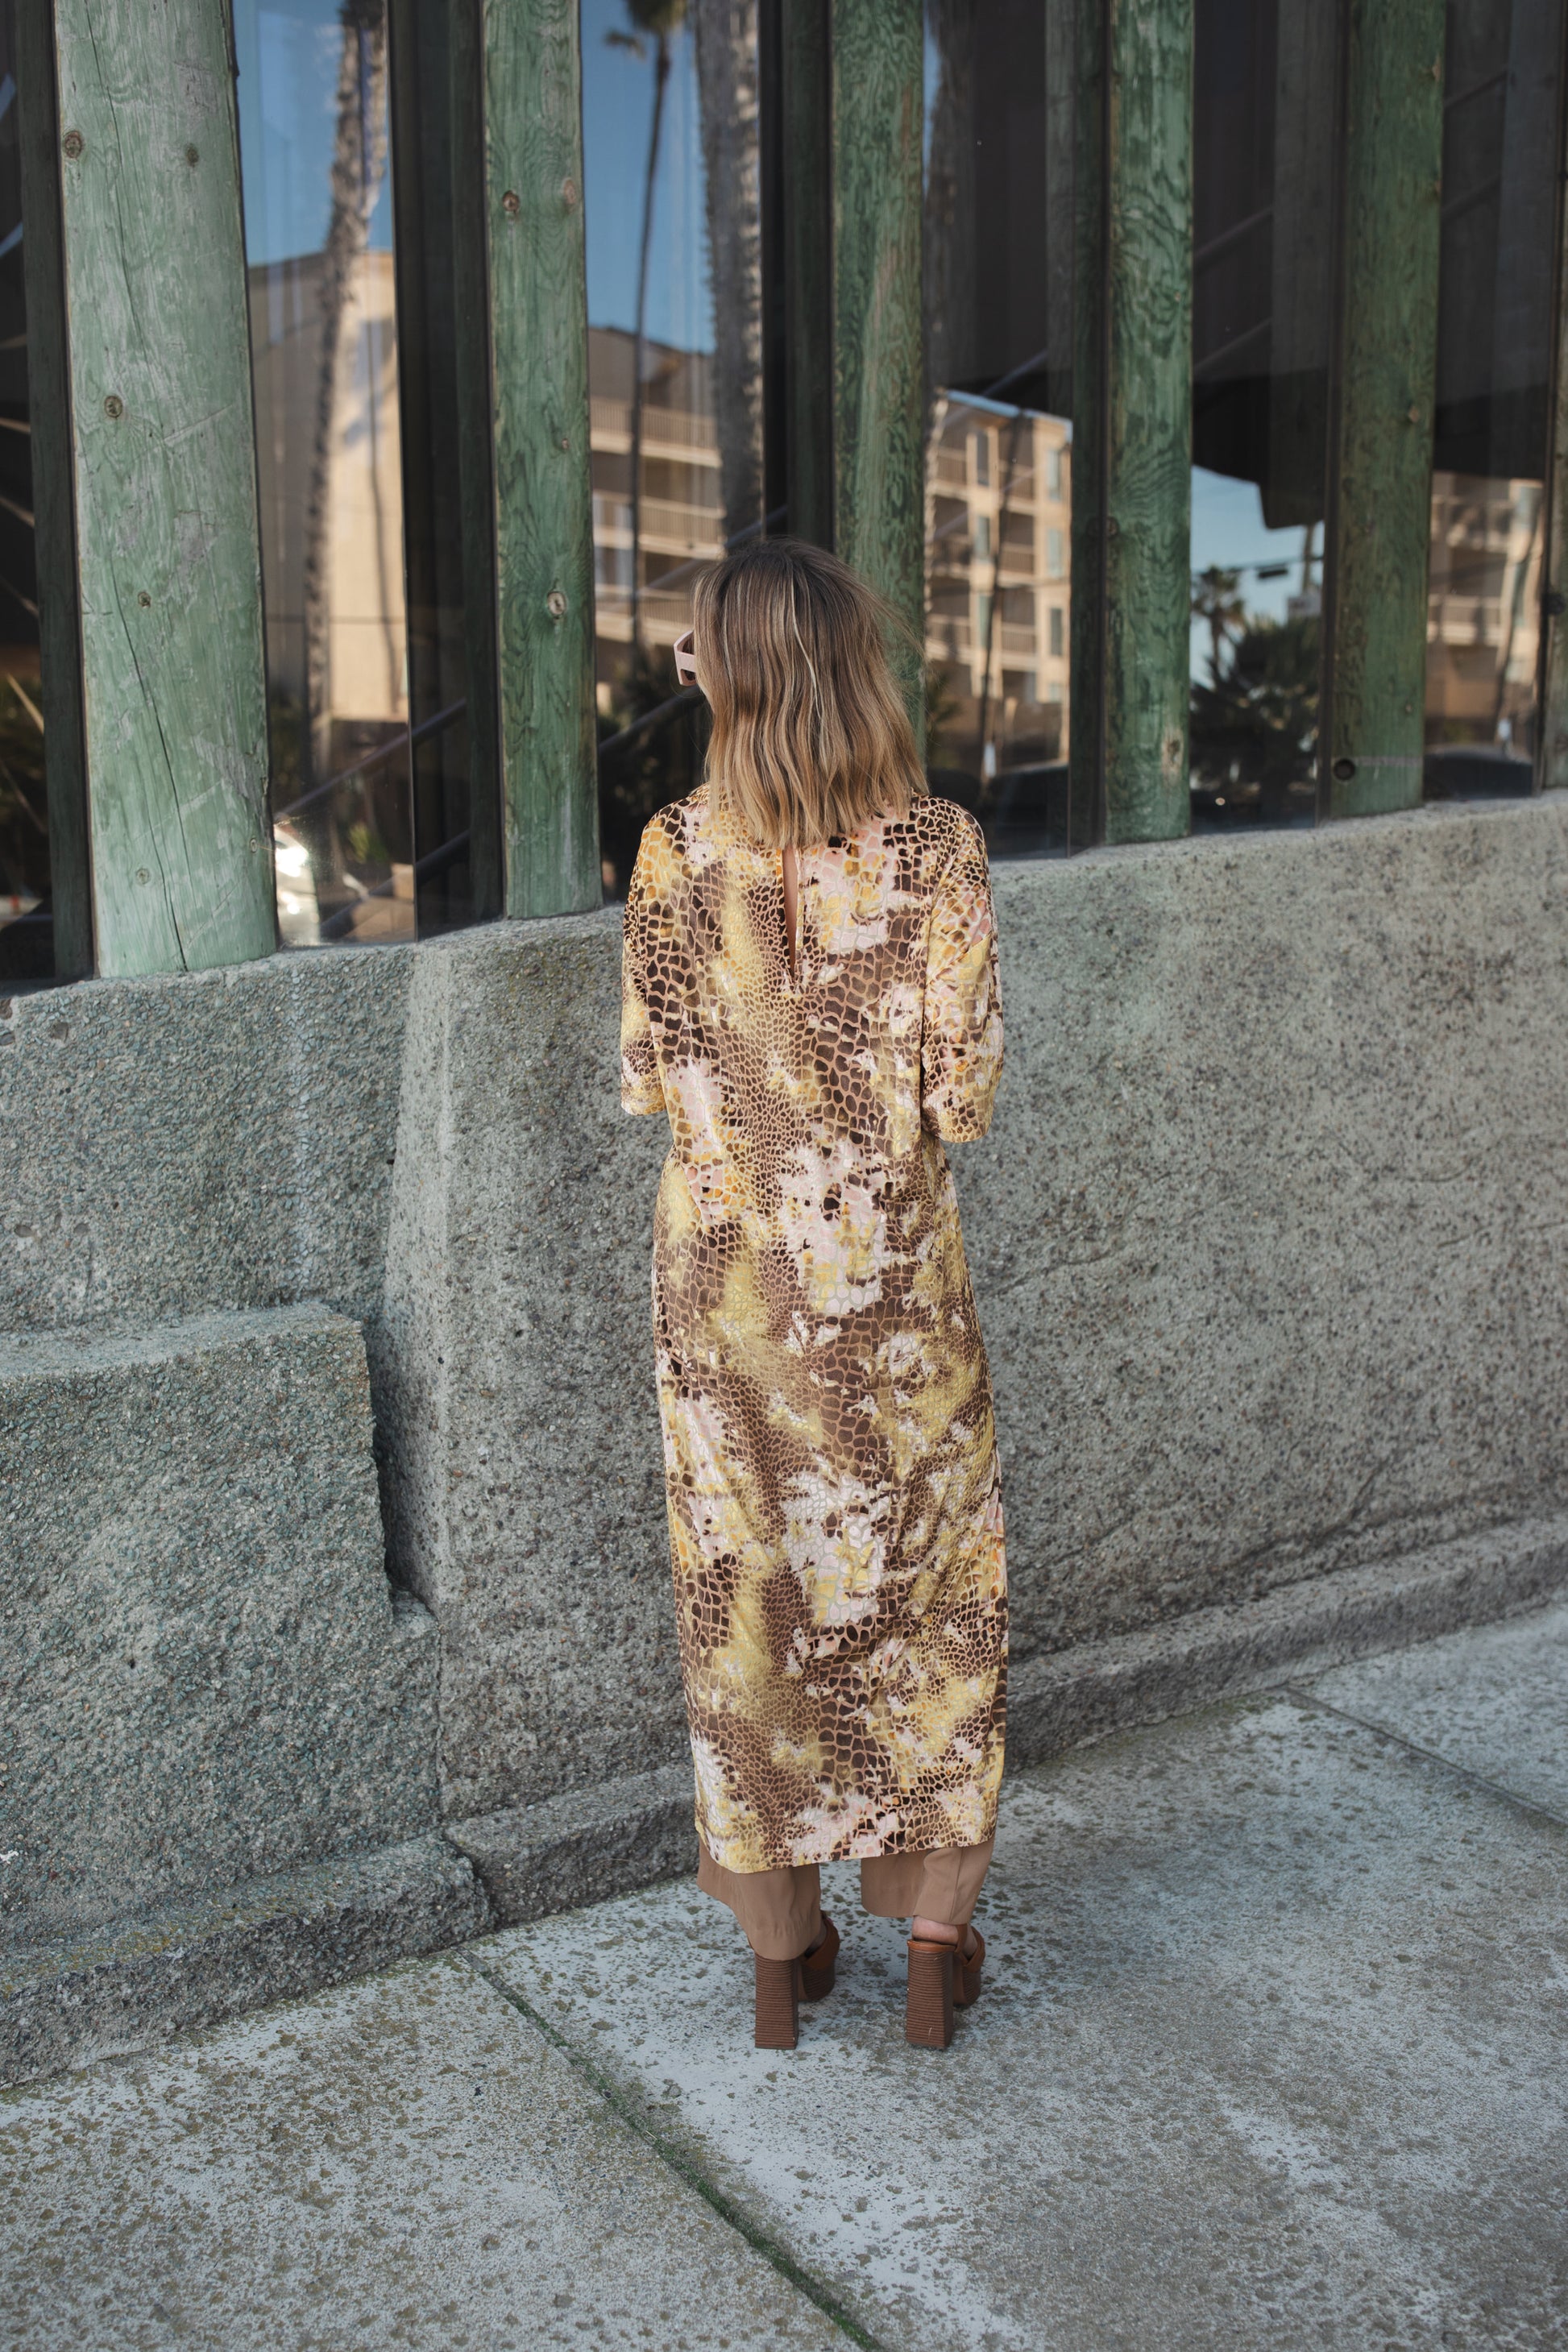 Giraffe velvet side split tunic. This yellow multishade tunic is made from velvet burnout in giraffe pattern. Light, floaty, and slinky it features a back keyhole closure, ankle length hem, mid-length sleeve, and knee length slits on both sides.